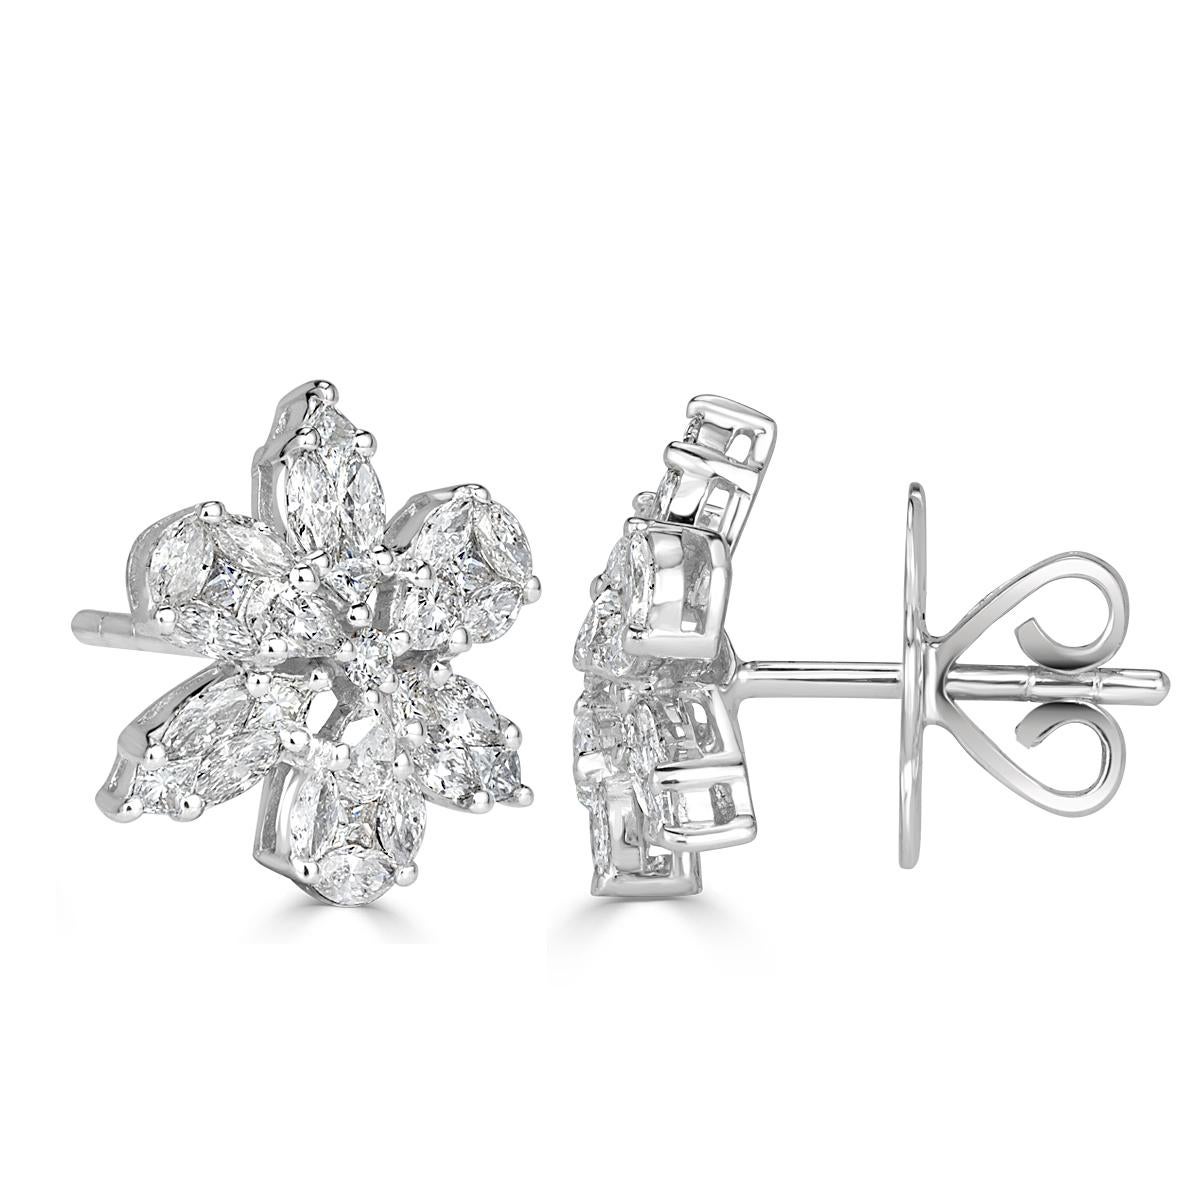 Mark Broumand 1.85 Carat Floral Cluster Diamond Earrings at 1stDibs